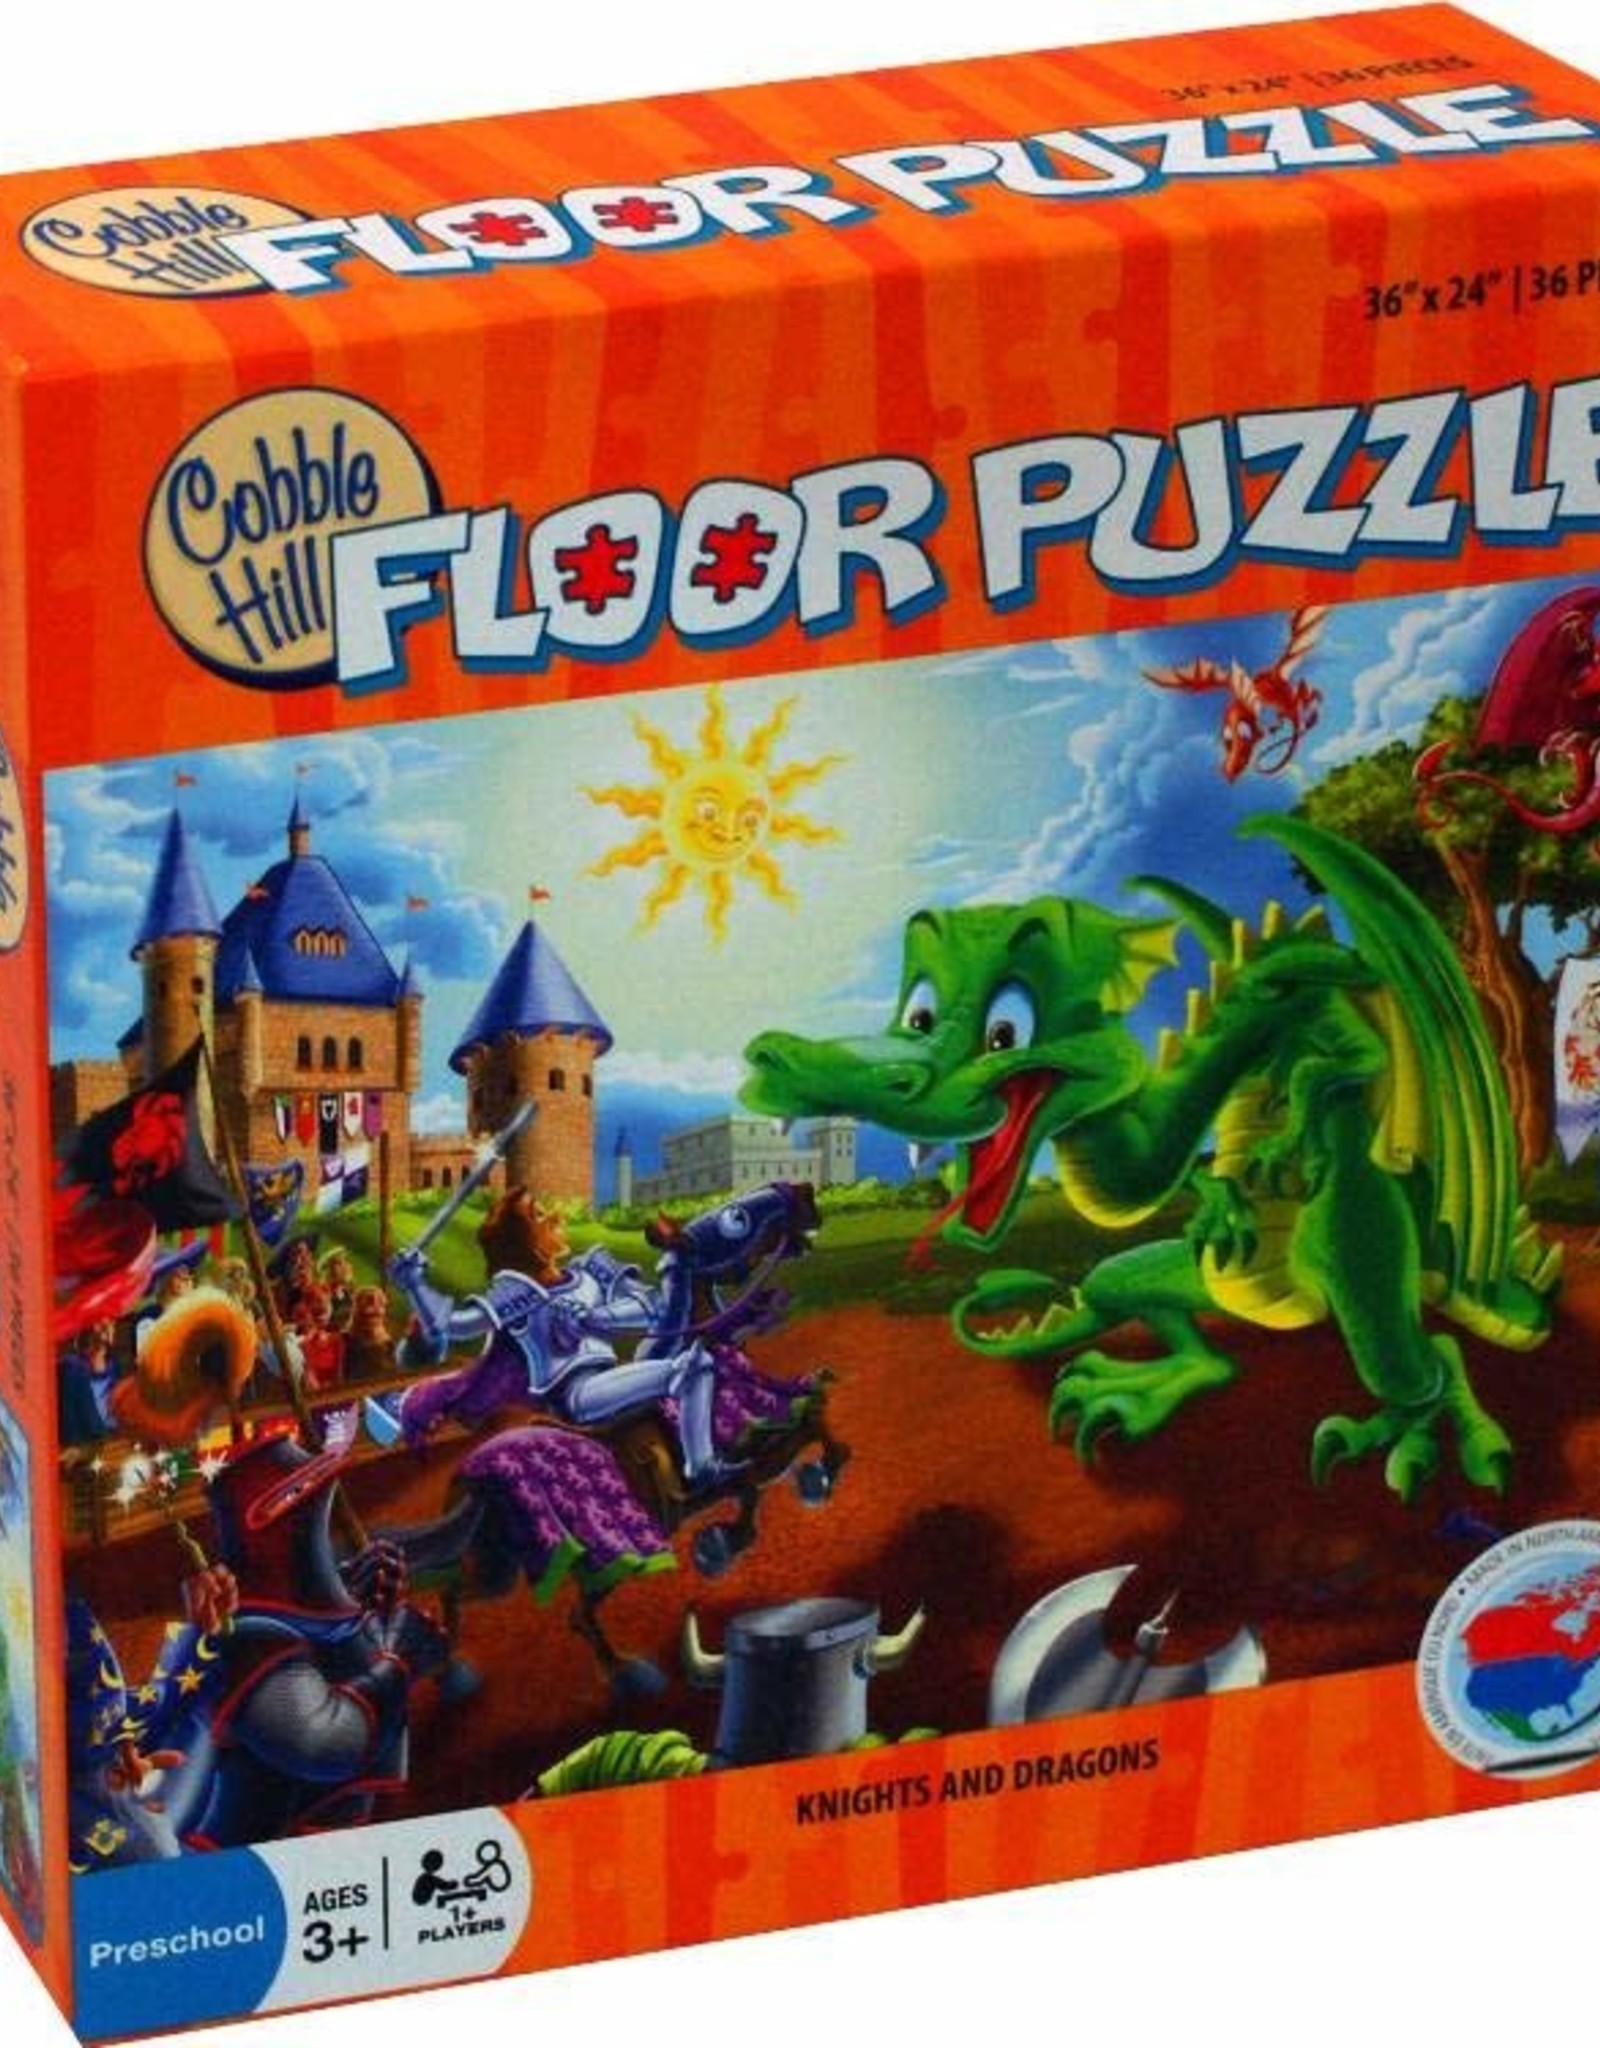 Cobble Hill Cobble Hill: 36 Piece Floor Puzzle - Knights and Dragons